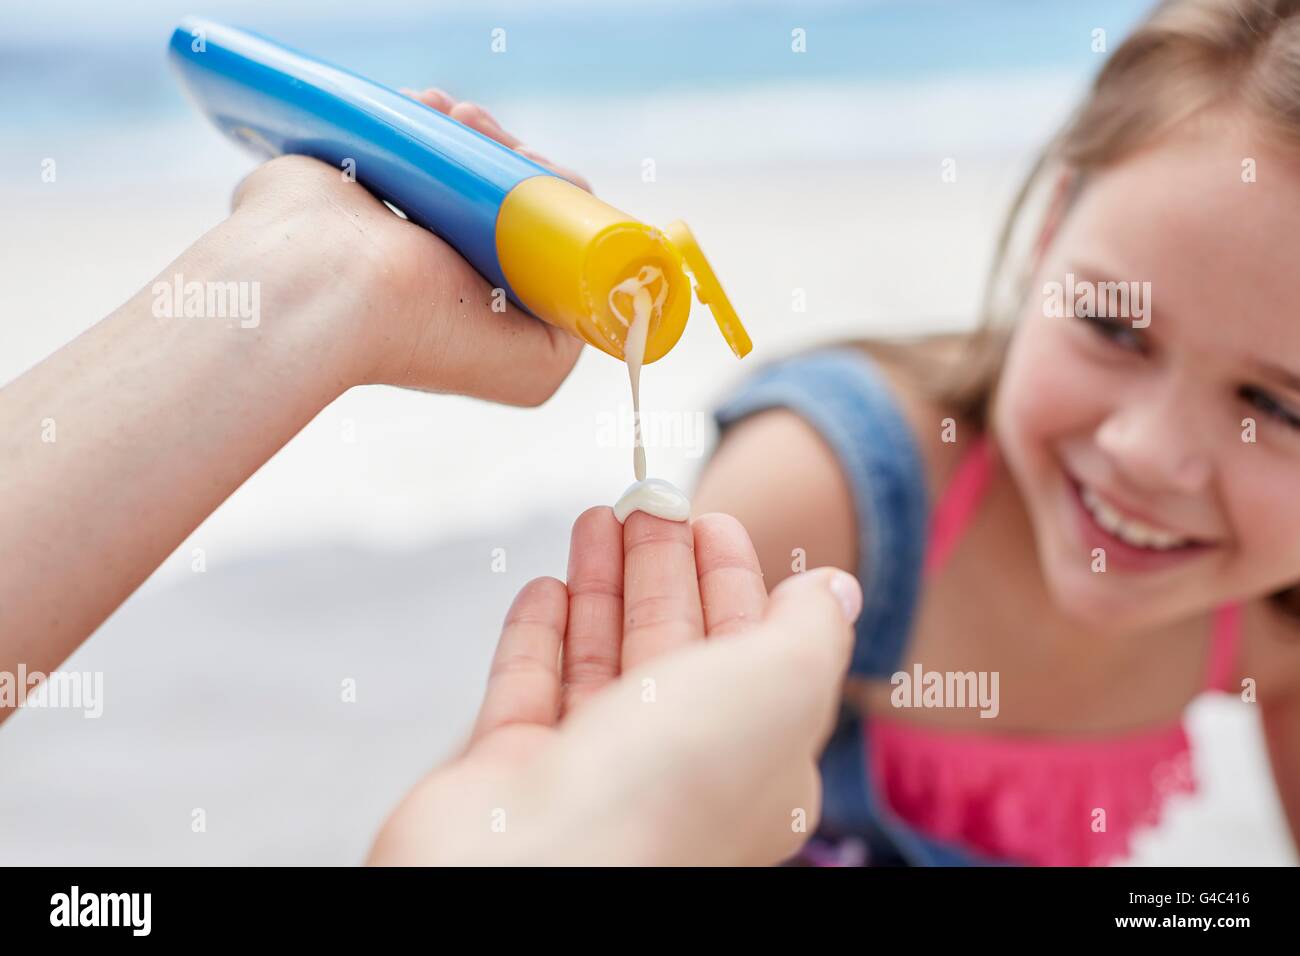 MODEL RELEASED. Person applying sun cream to a girl, close up. Stock Photo